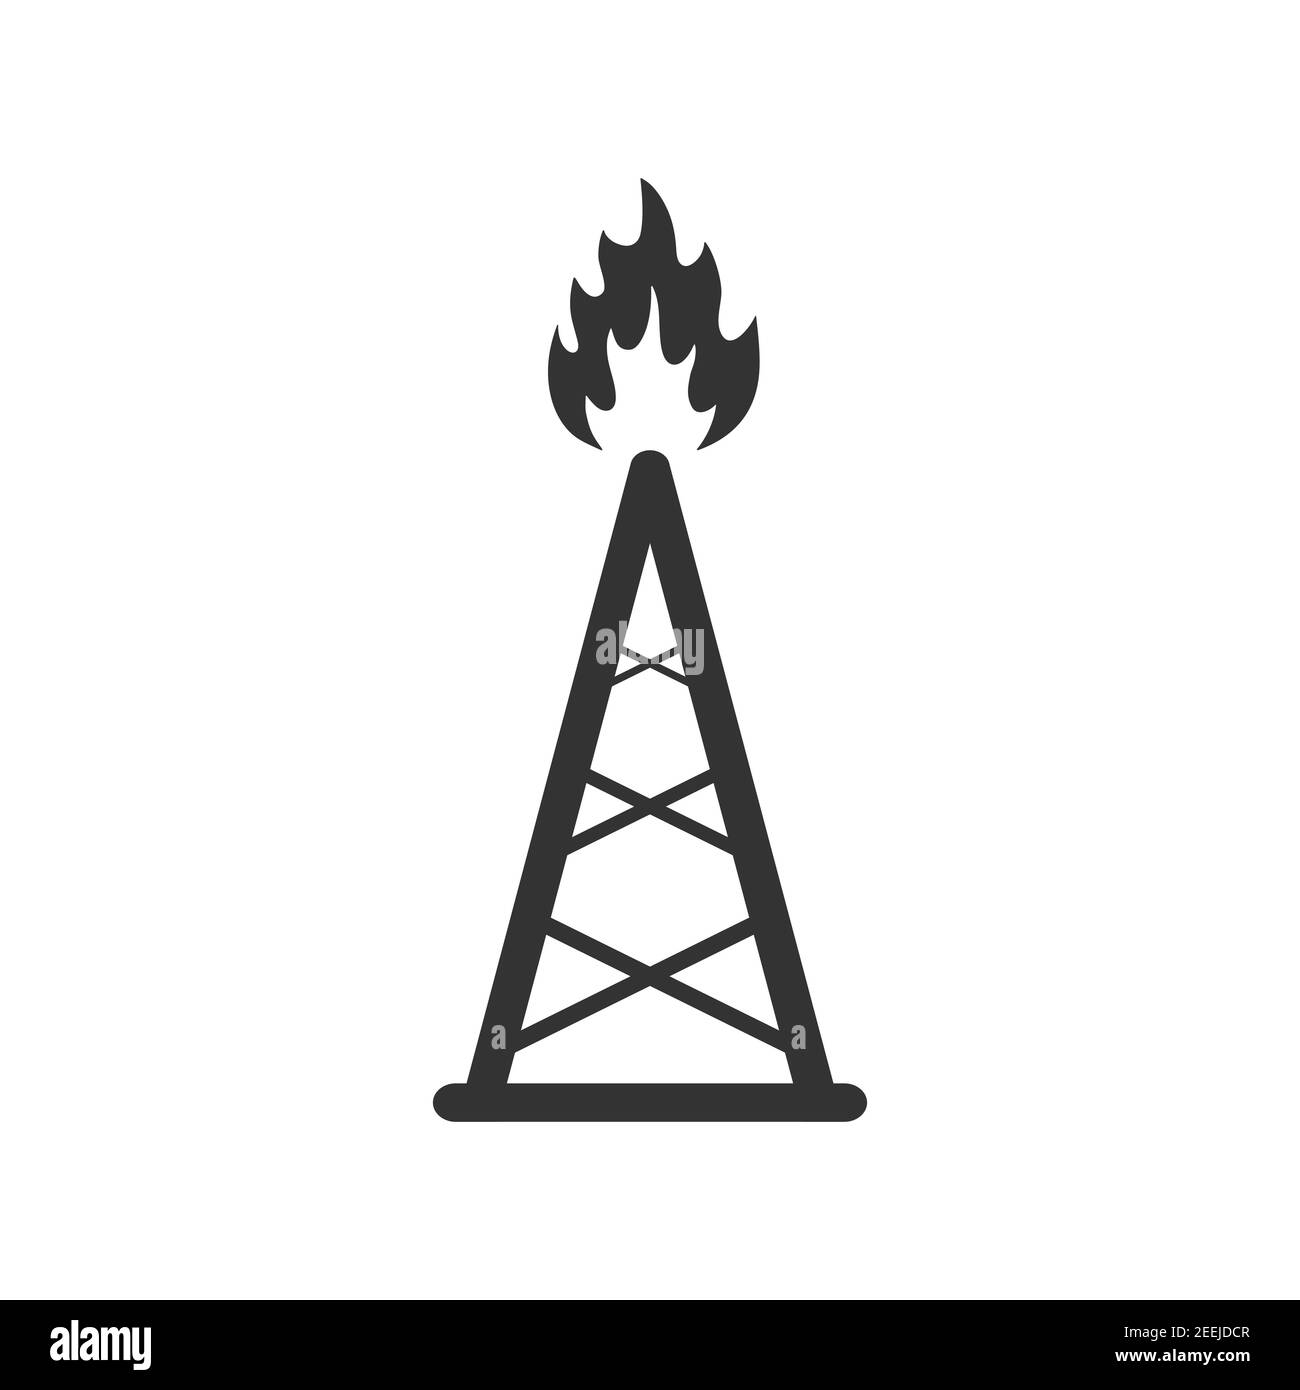 Oil rig icon. Pump jack sign. Oil drilling wells symbol. Vector isolated on white Stock Vector